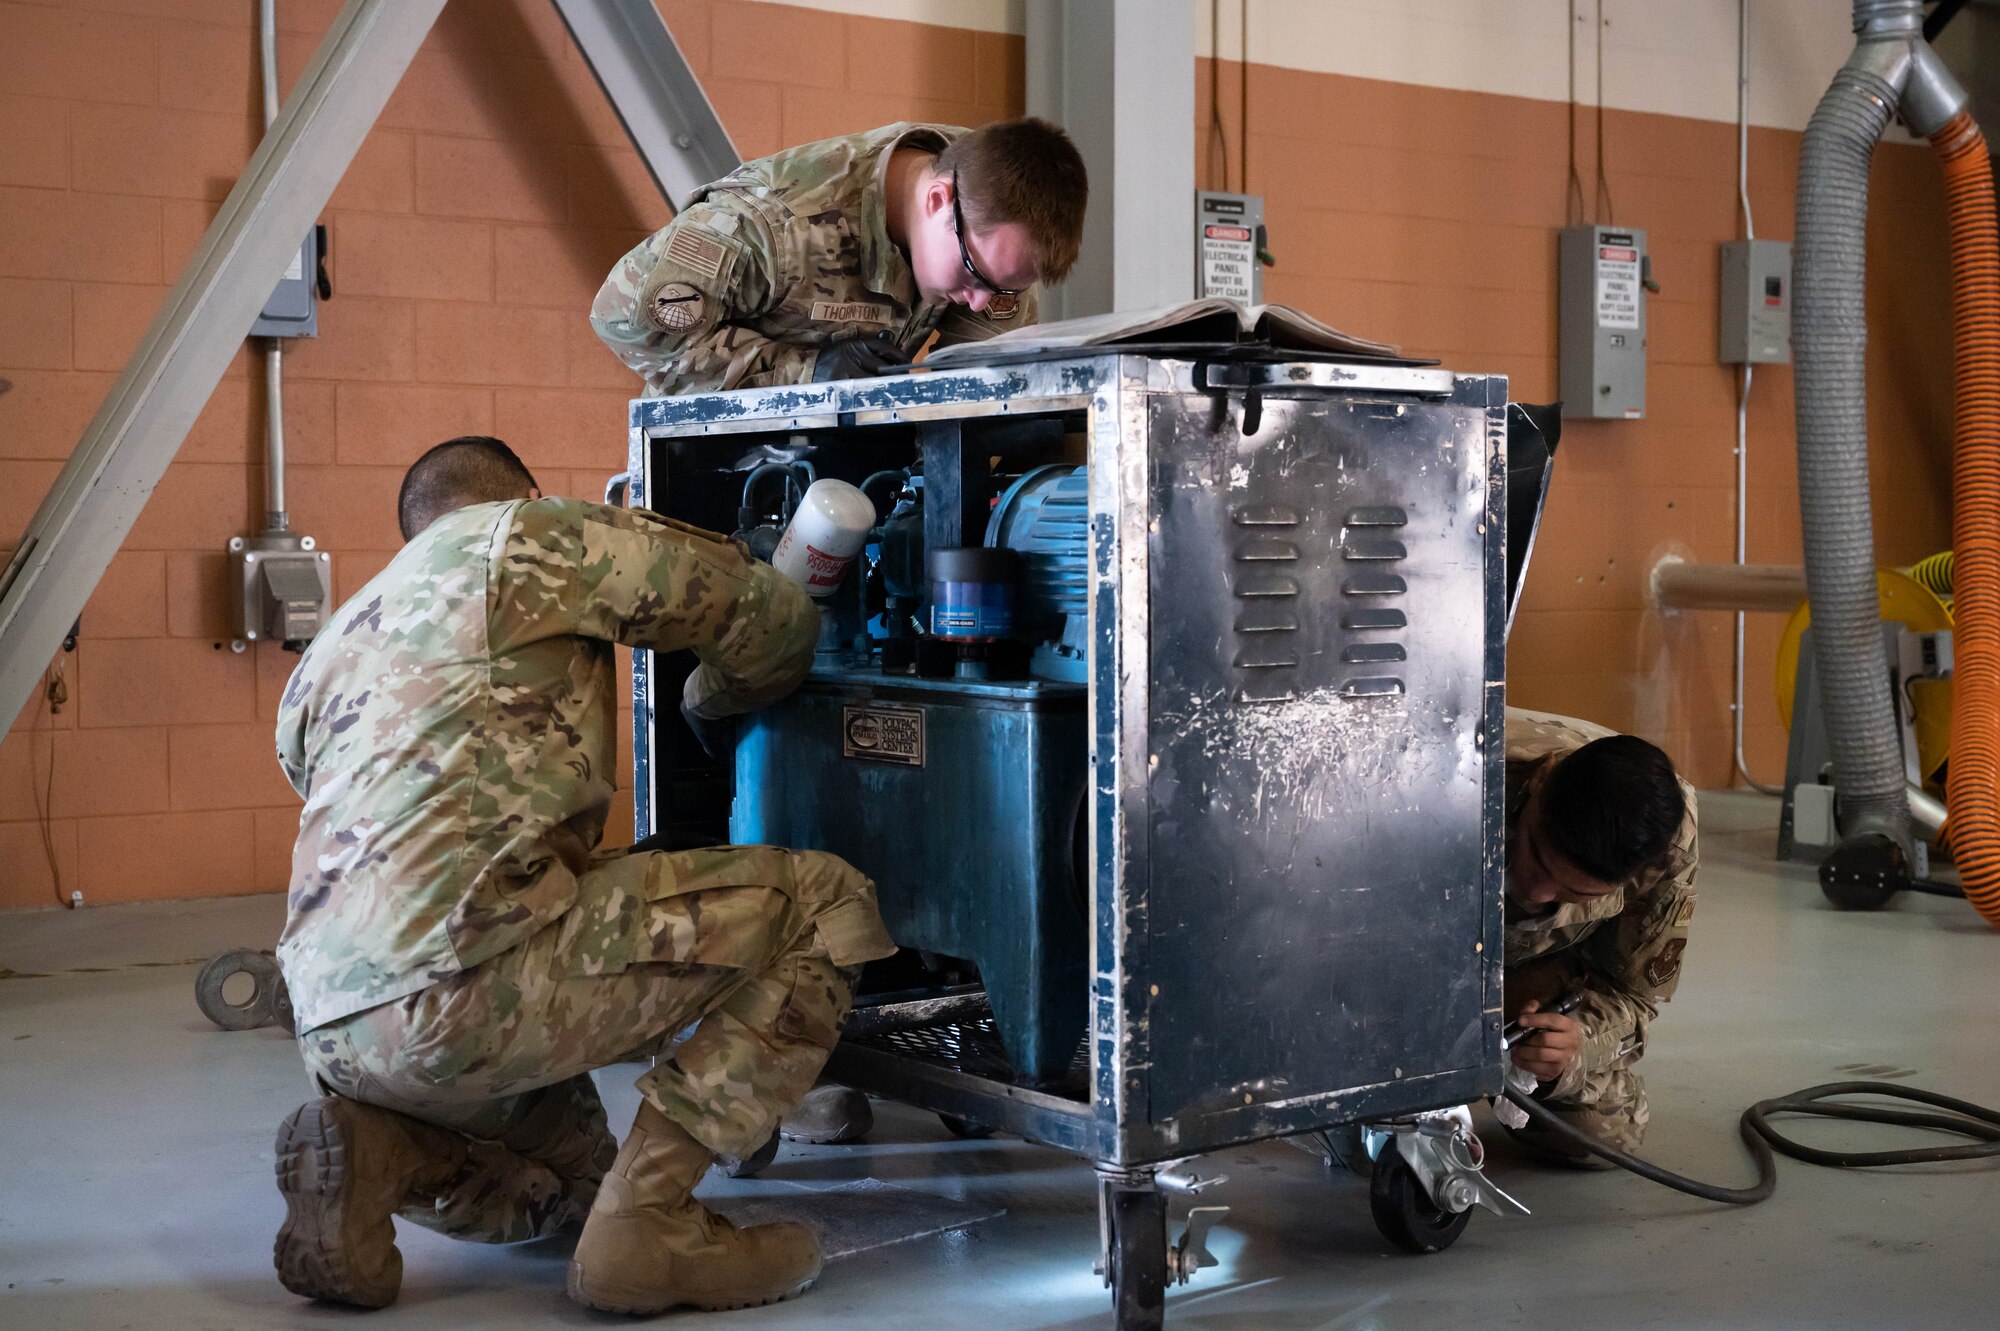 Staff Sgt. Steven Navarro, left, 741st Maintenance Squadron mechanical and pneudraulics team chief; Senior Airman Travis Thornton, center, and Senior Airman Joseph Vargas, right, 741st MXS MAPS technicians, inspect a component of a hydraulic actuator power unit July 28, 2021, at Malmstrom Air Force Base, Mont.